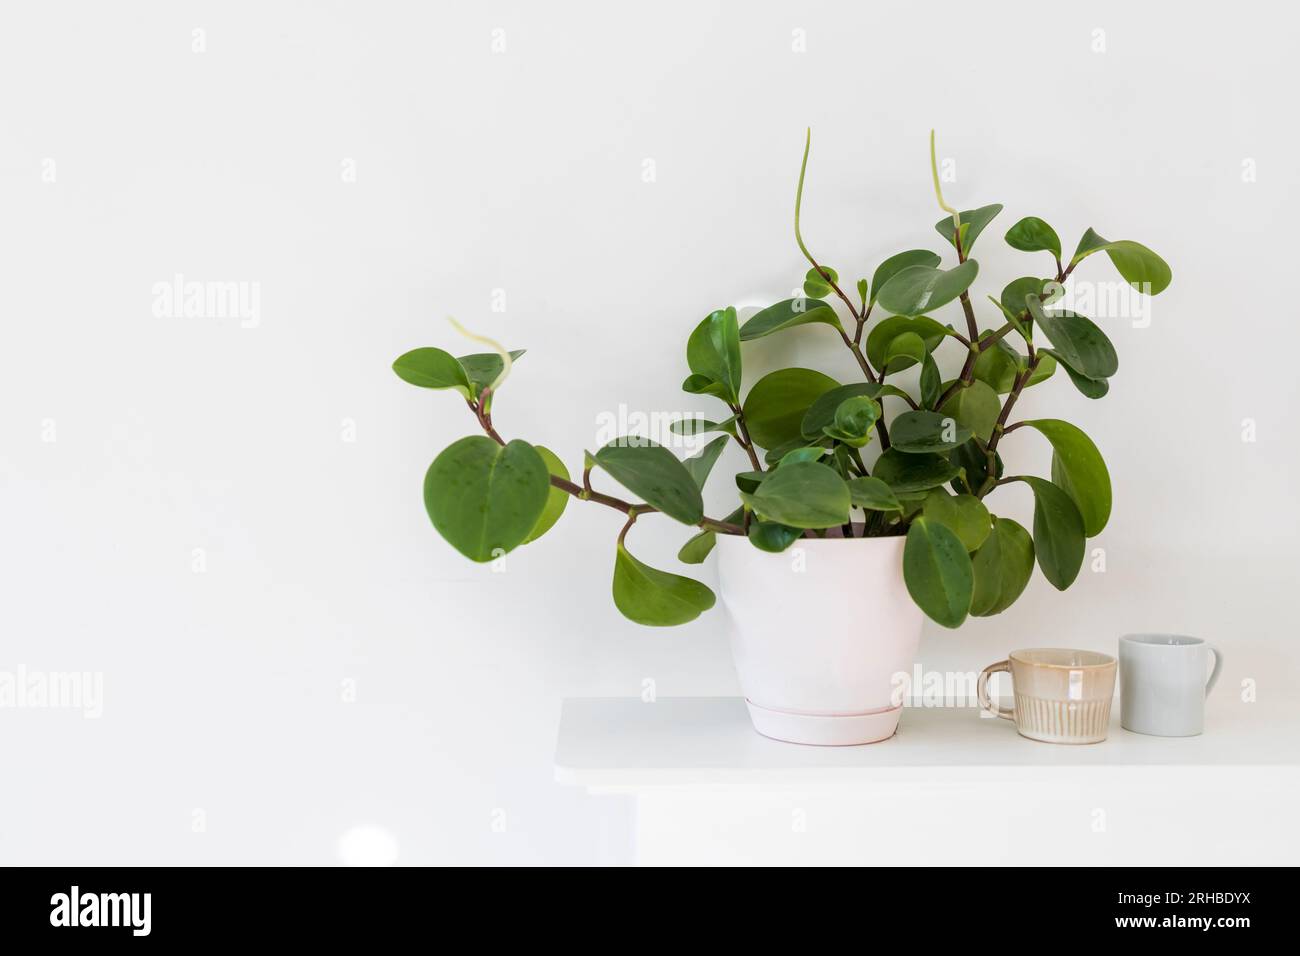 Peperomia (P. magnoliifolia) pot plant, also known as the Radiator Plant and Desert Privet Plant, with deeply wrinkled, dark green leaves, in a pink p Stock Photo